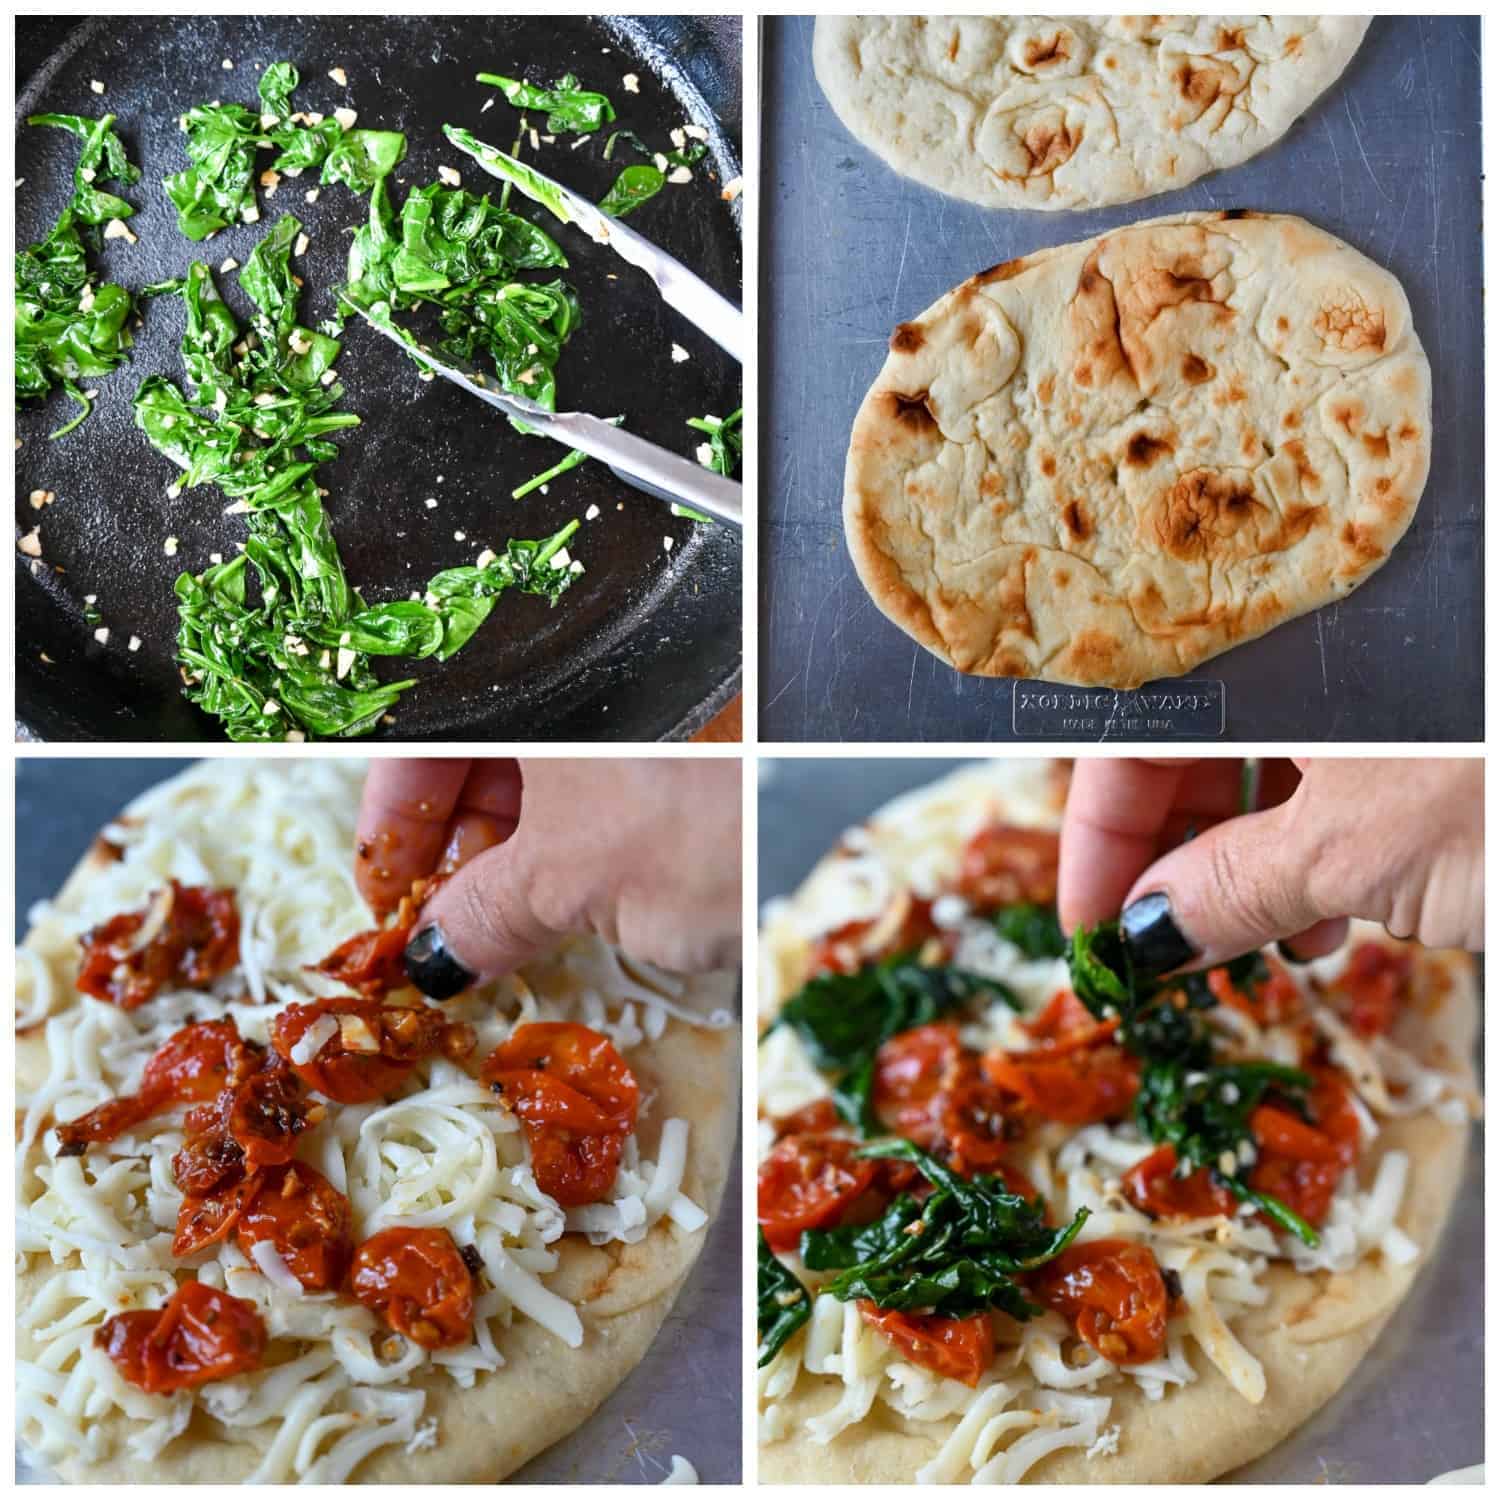 Four process shot photos. First one, a skillet with sauteed spinach. Second one, two flatbreads on a baking sheet. Third one, cheese and roasted tomatoes being placed onto the flatbread. Fourth one, Sauteed spinach being placed onto the flatbread.